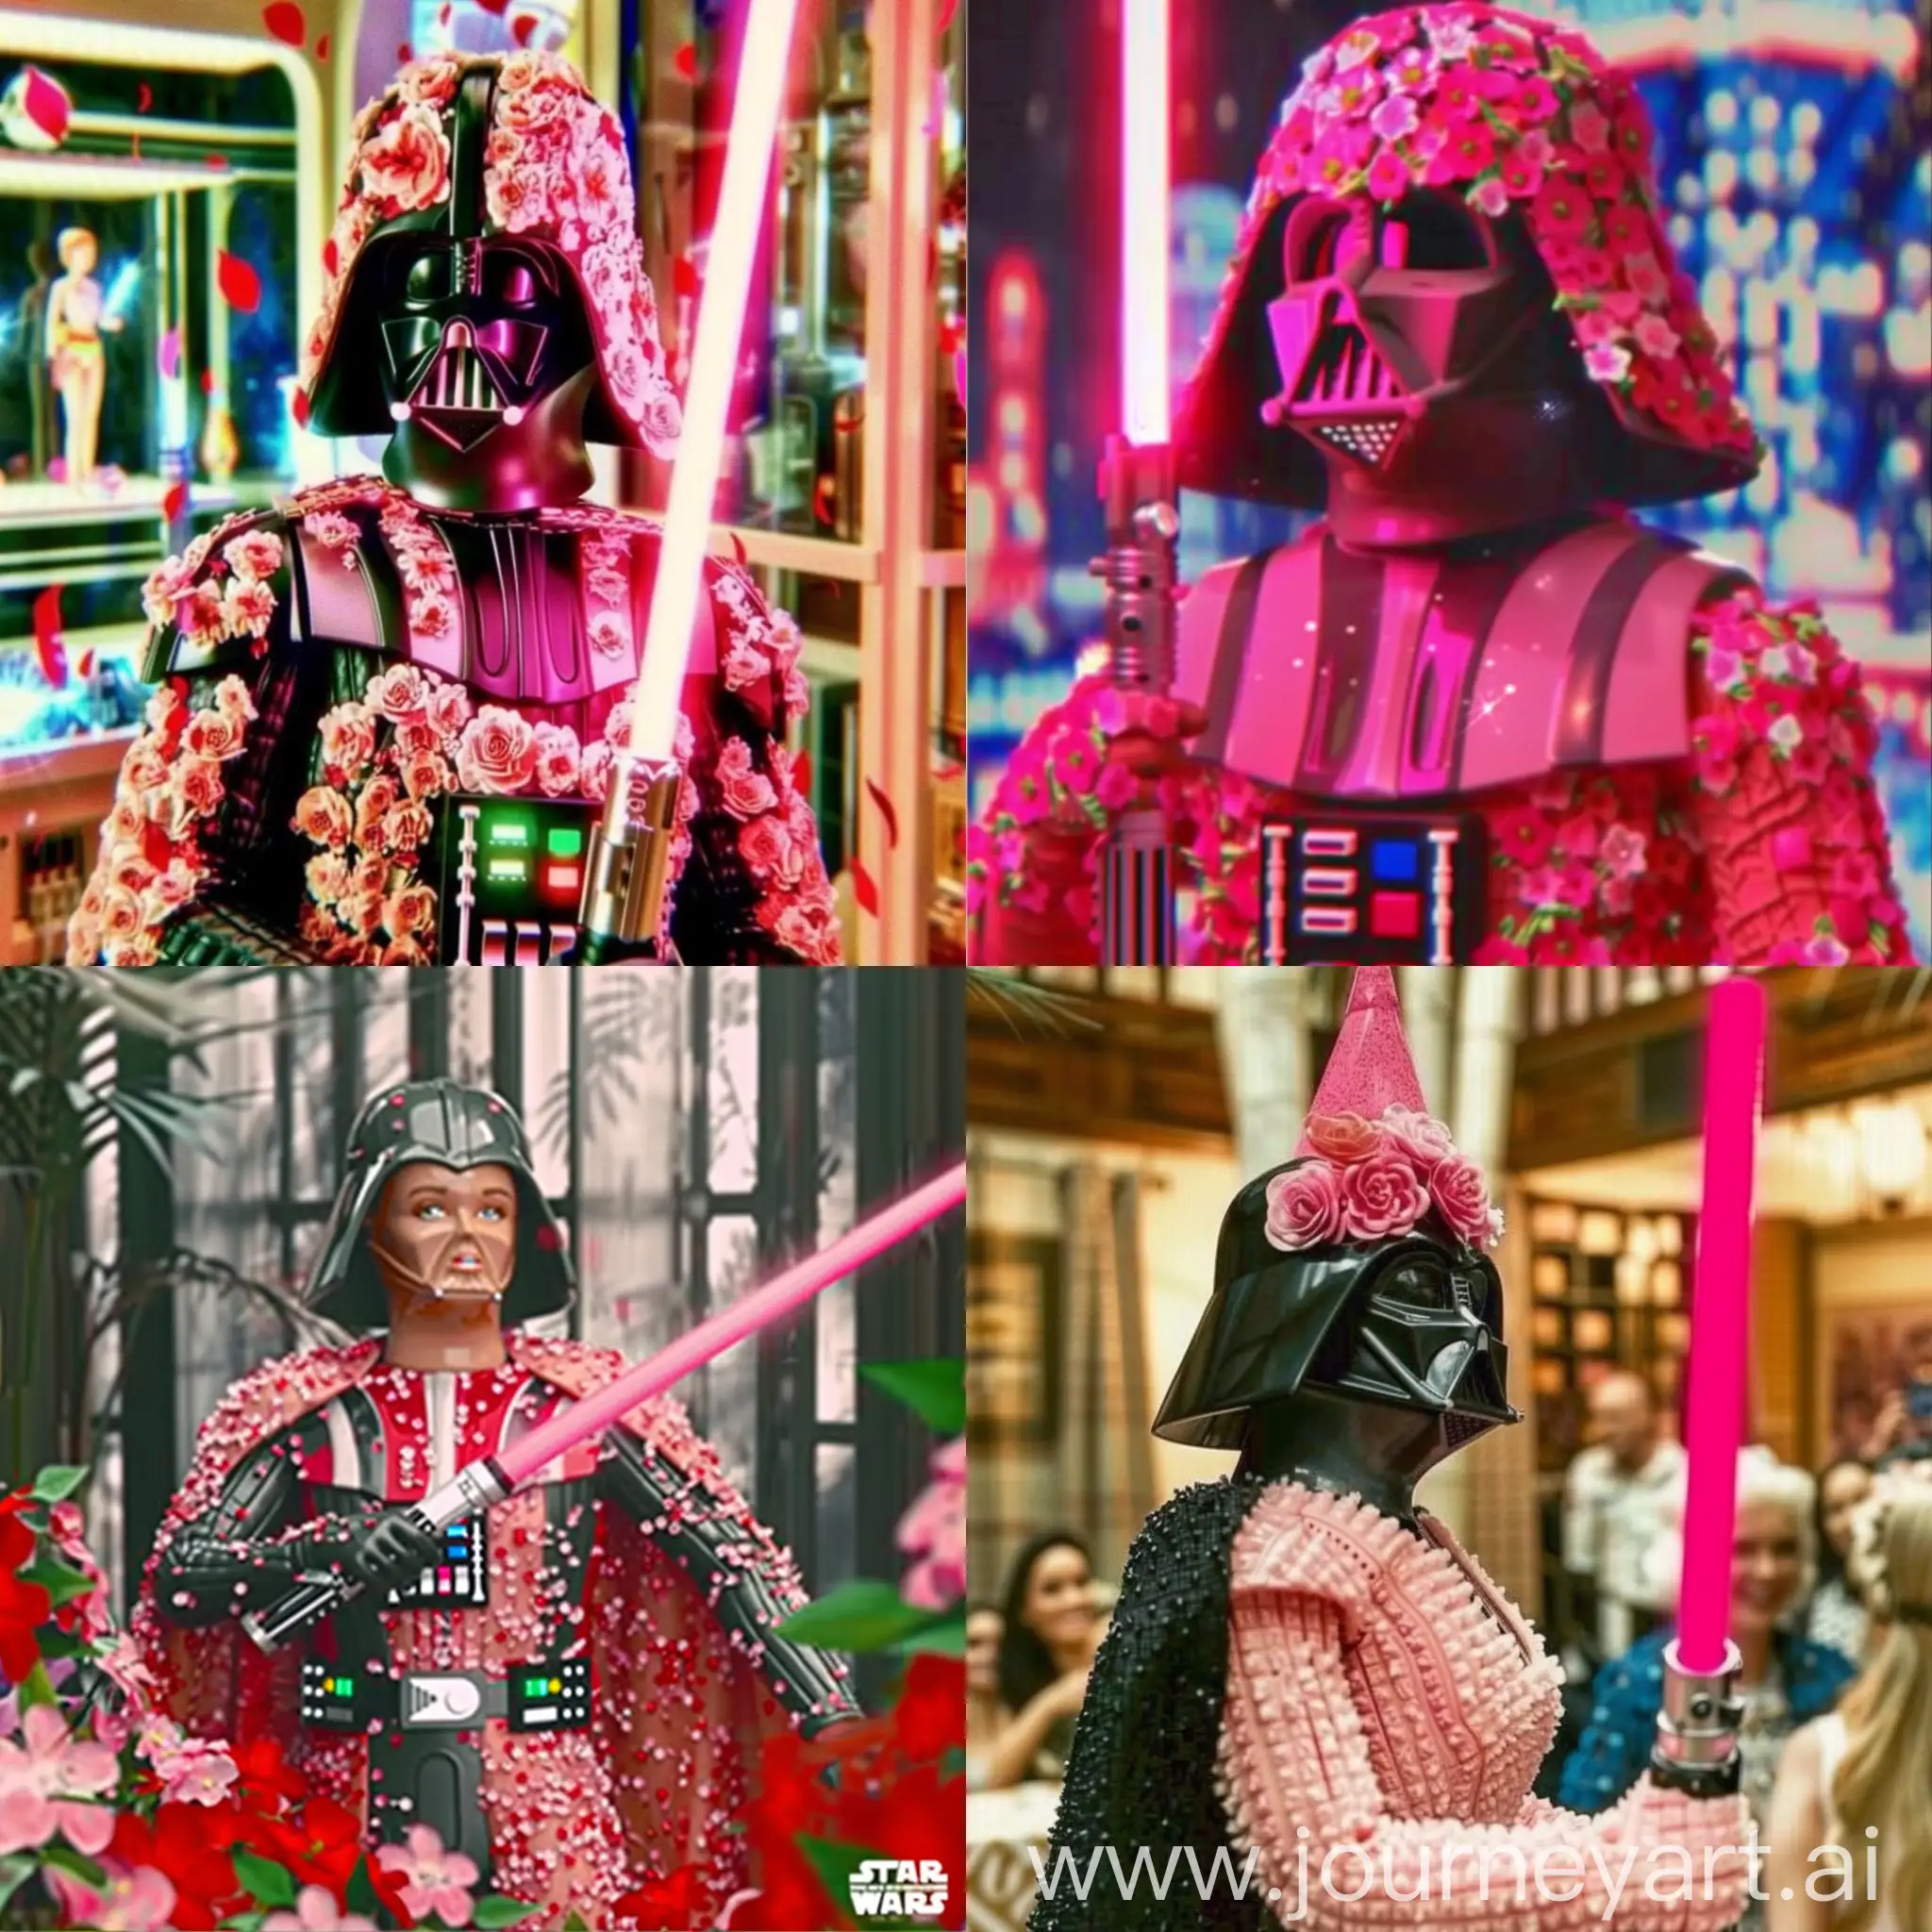 Darth Vader  in romantic genre film, dvd screenshot from anime film, barbie Vader wearing barbie (pink and romantic and flowery) costume, holding pink lightsaber and 80s romantic film composition --weird 50